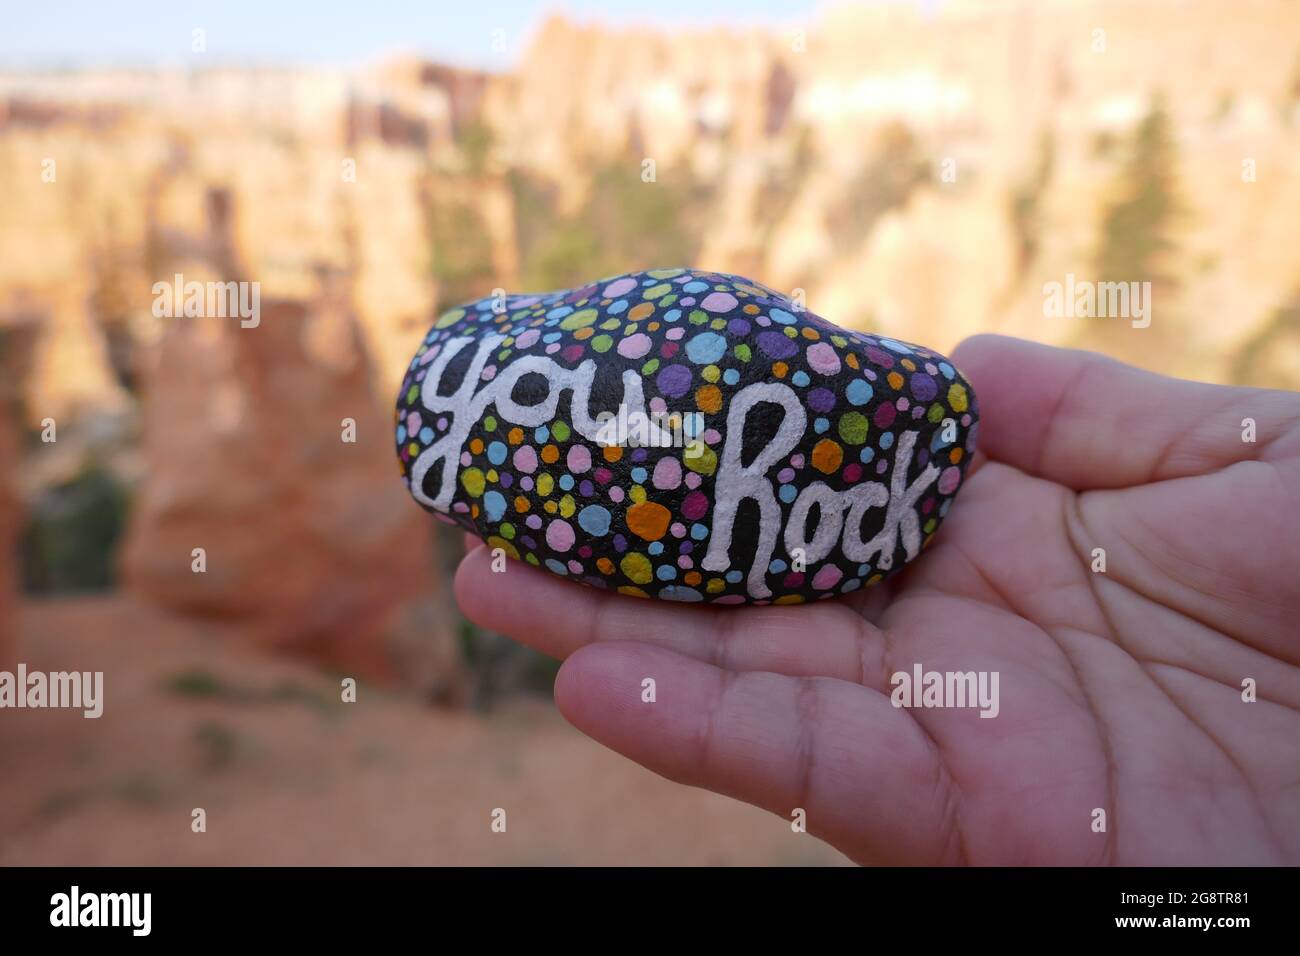 Kindness rock with painted you rock message held up on hand with Grand Canyon out of focus in background Stock Photo